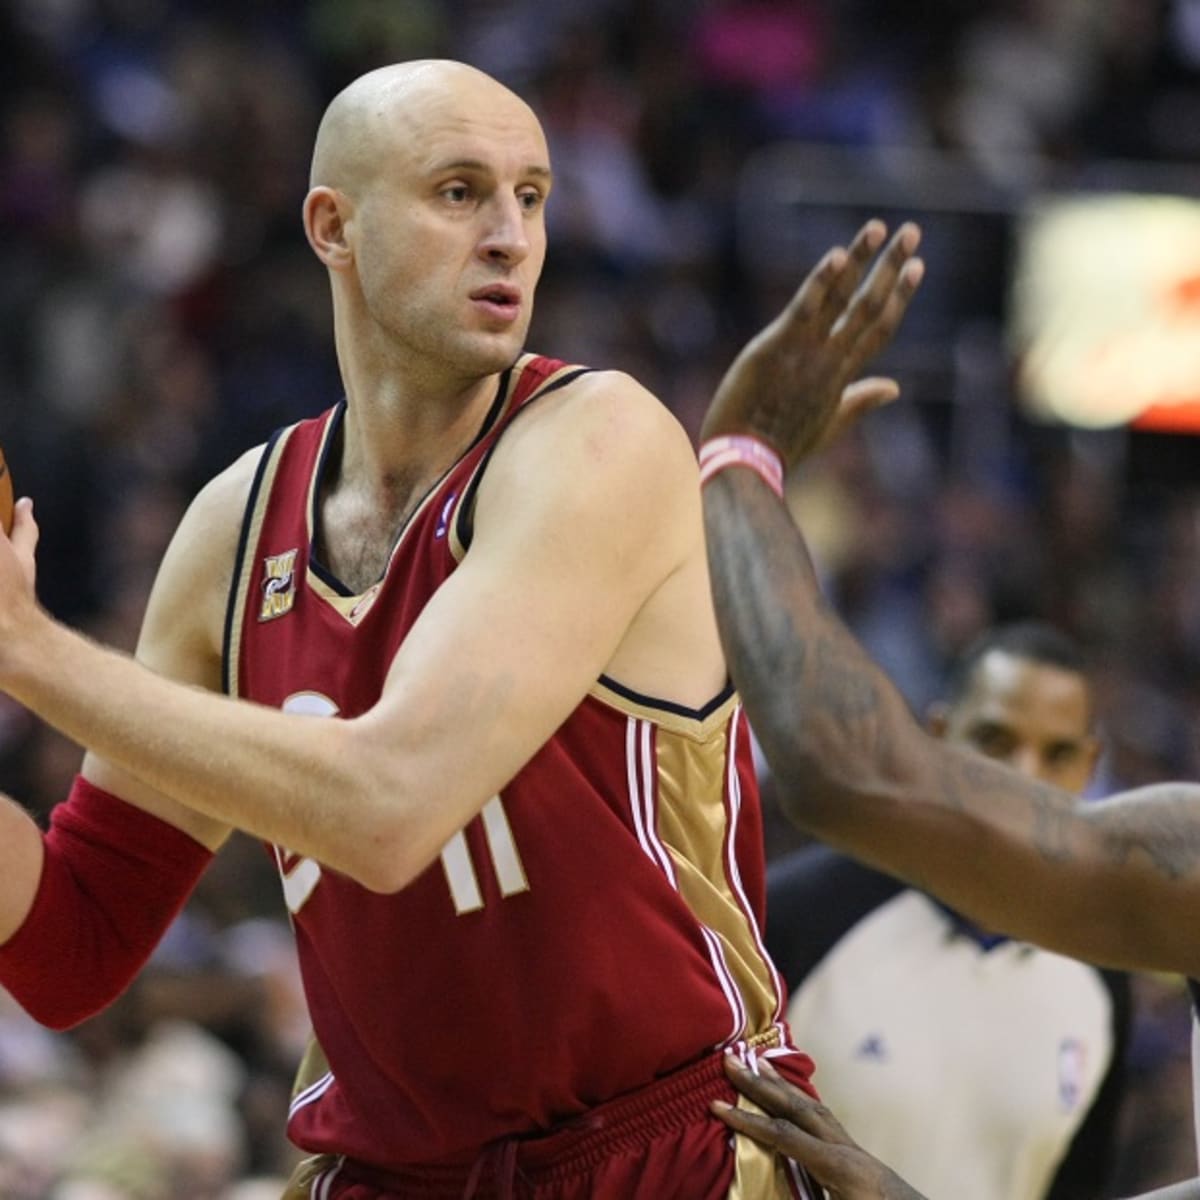 Zydrunas Ilgauskas' jersey is going up to where he can't even reach it.